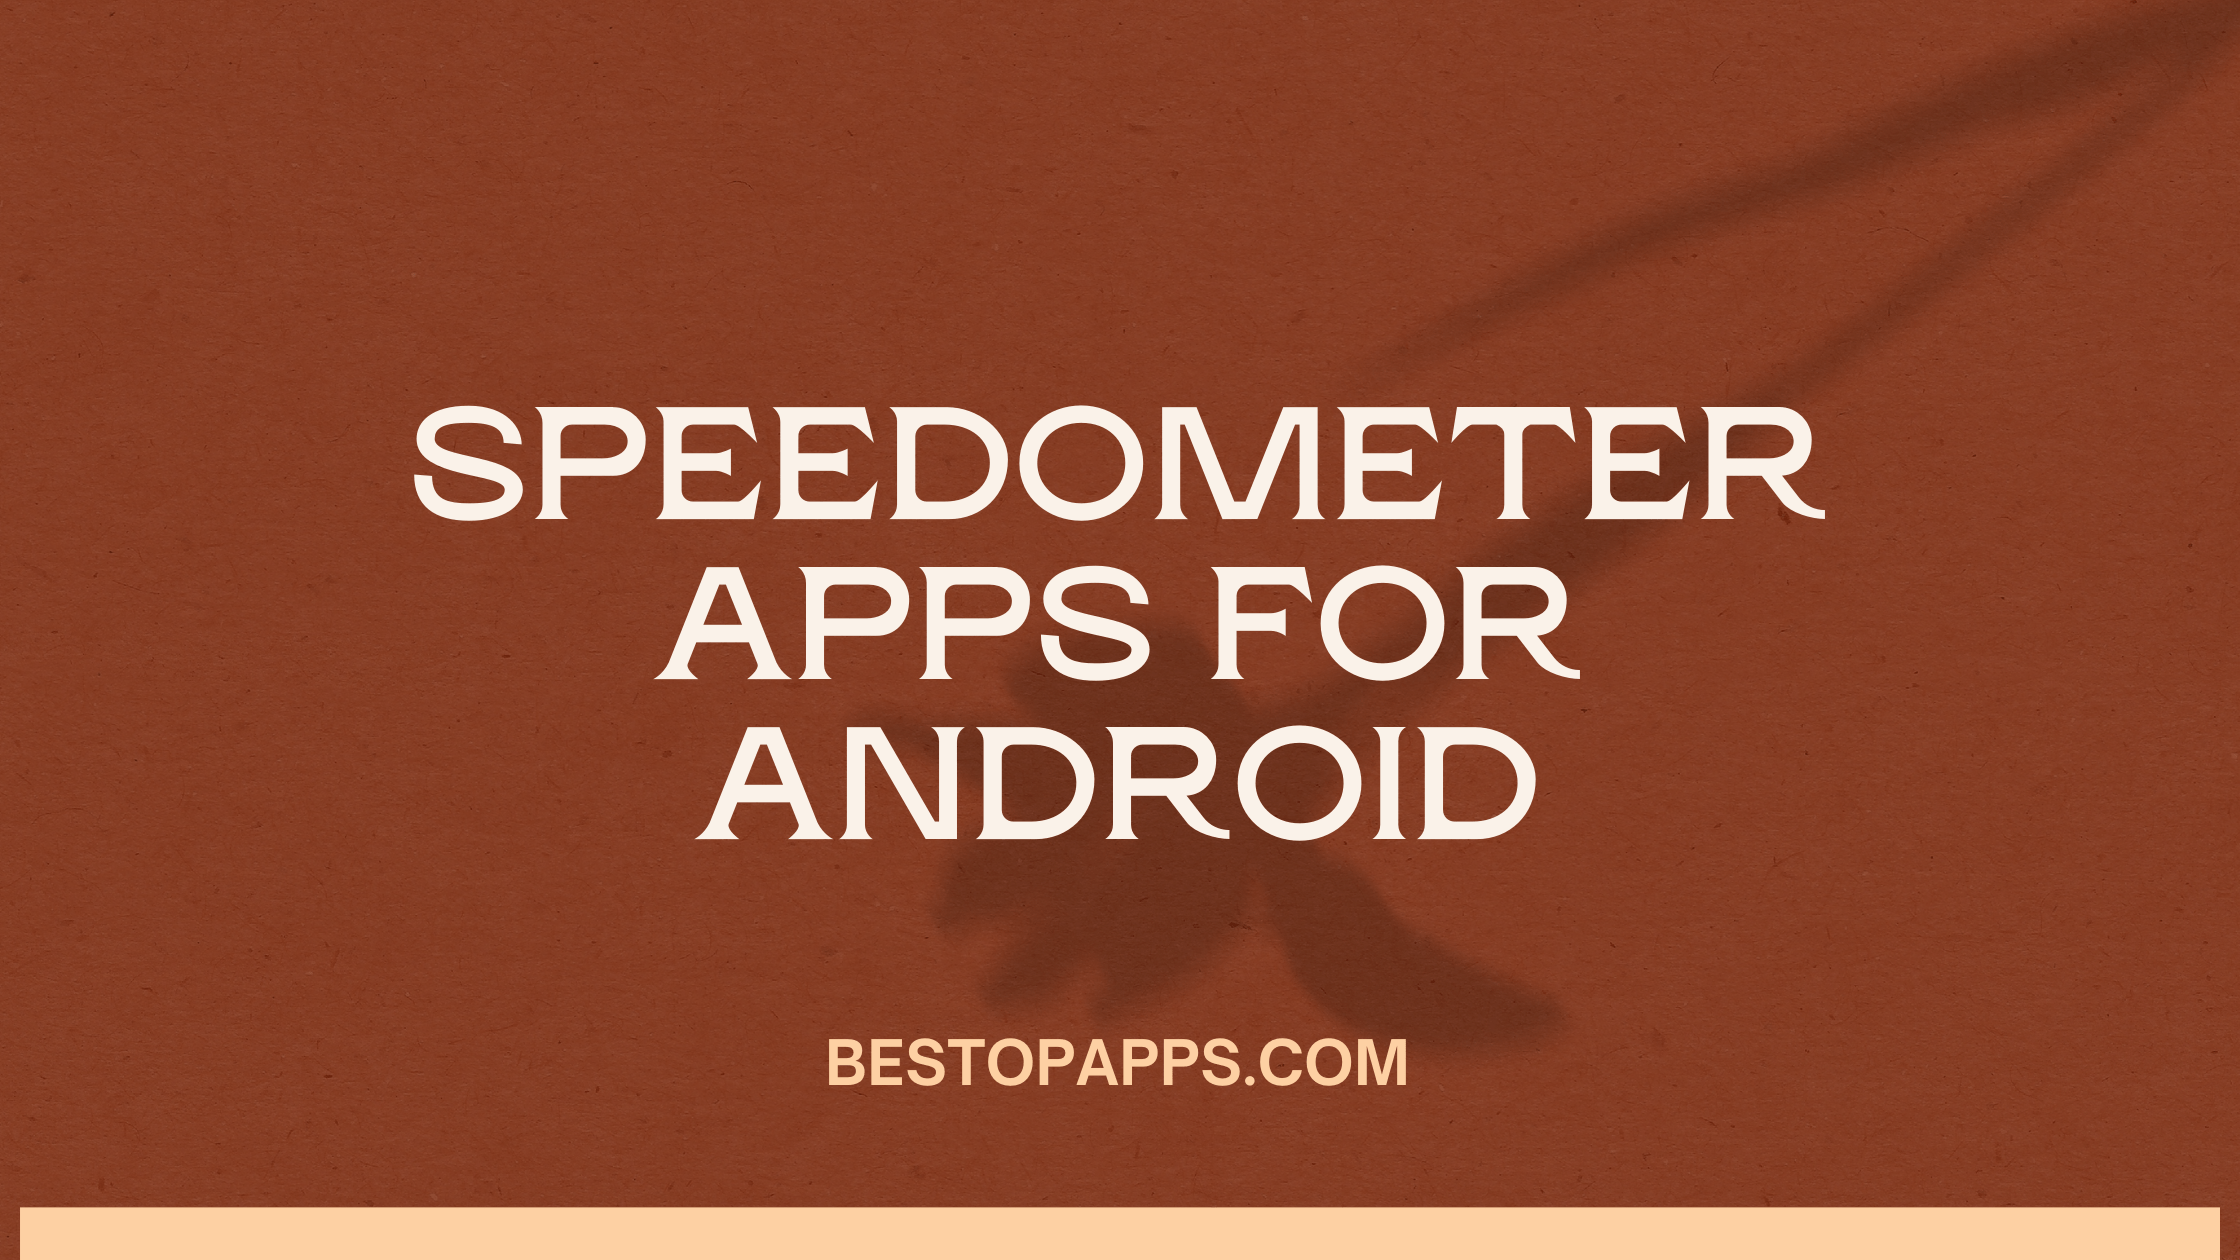 Speedometer Apps for Android